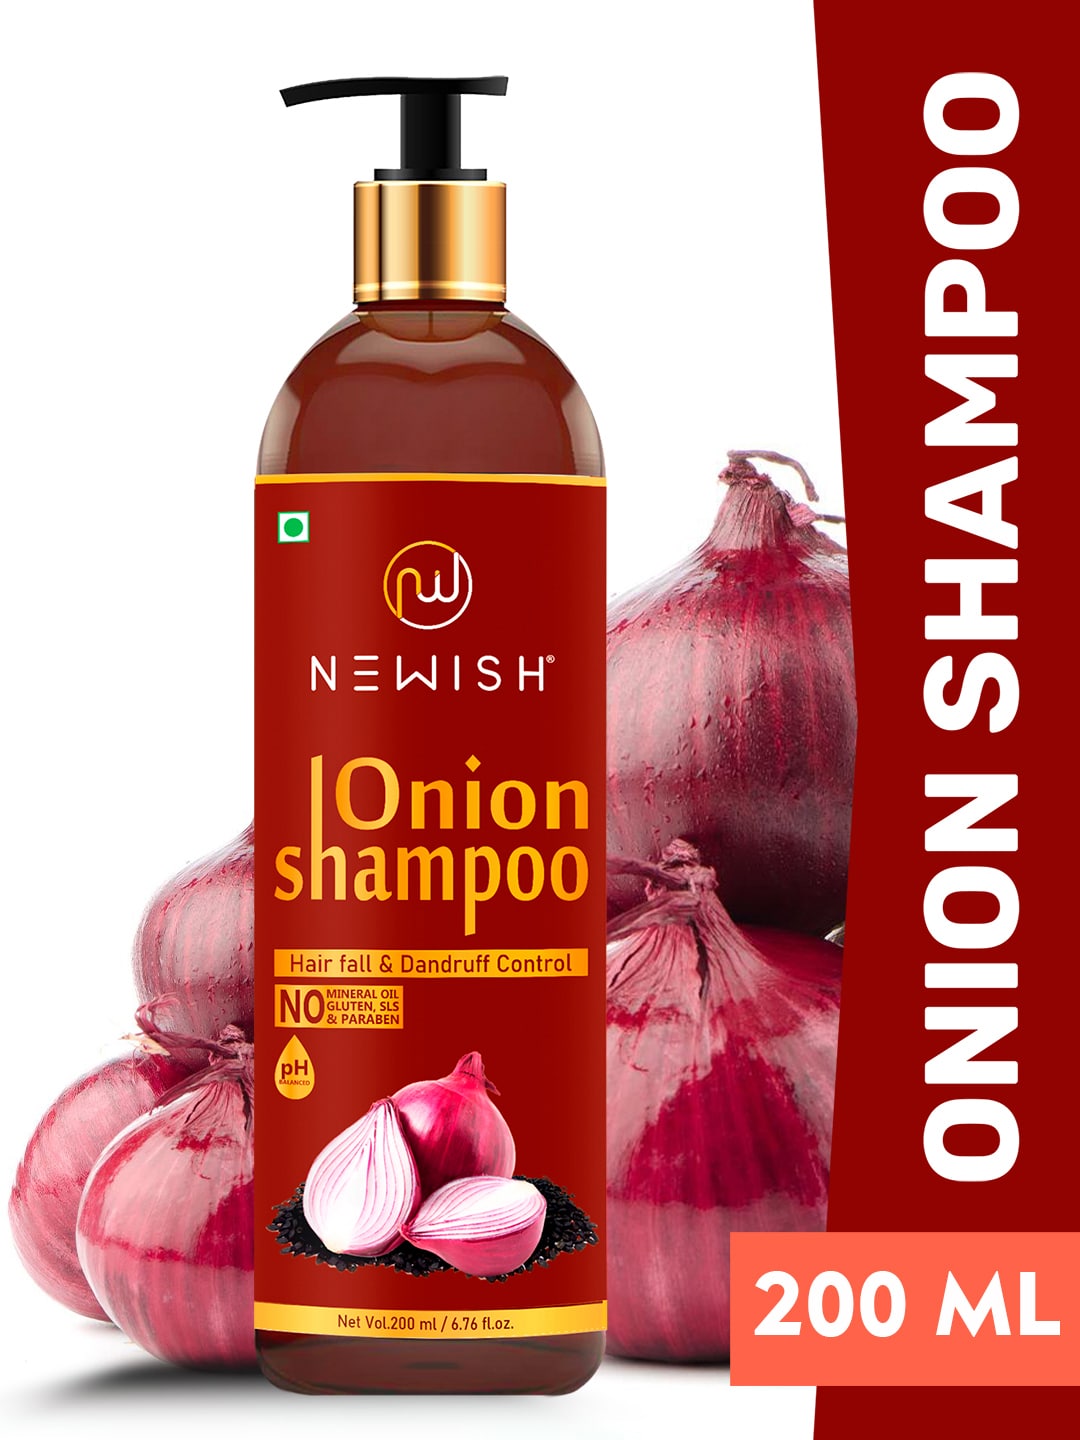 Newish Unisex Red Onion Shampoo For Hair Growth and Hairfall Control 200 ml Price in India